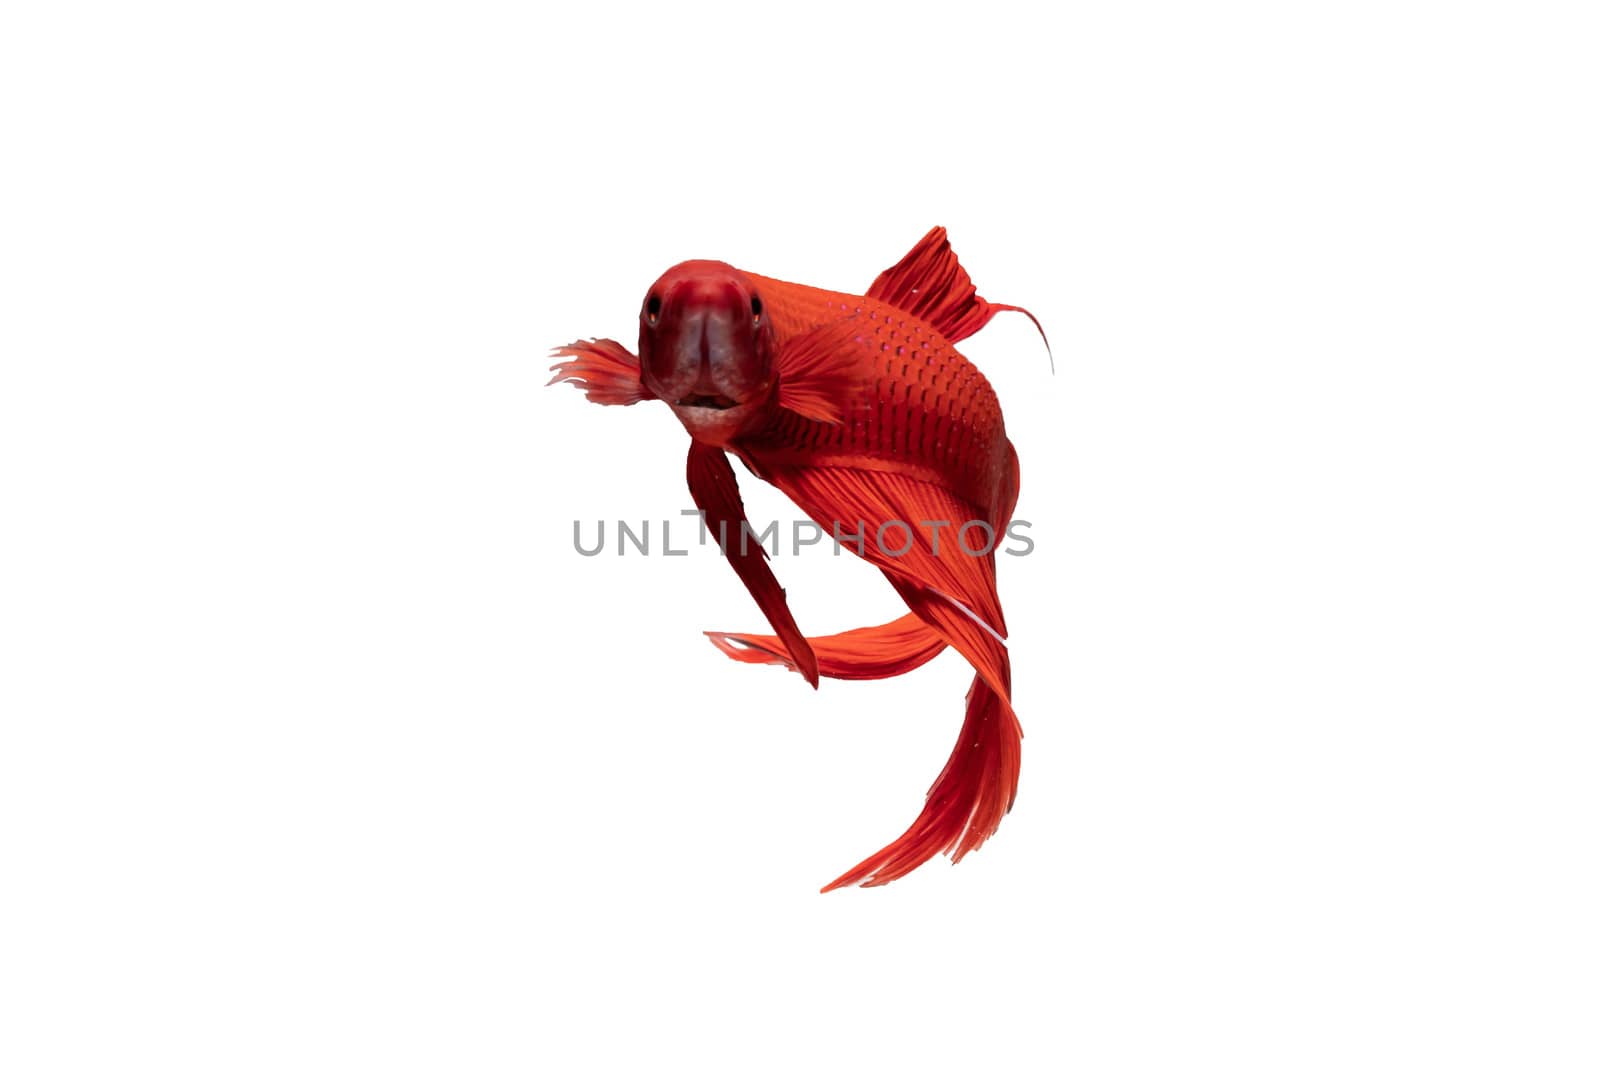 Moving moment of red Vailtail Siamese fighting fish or Betta spl by Bonn2210